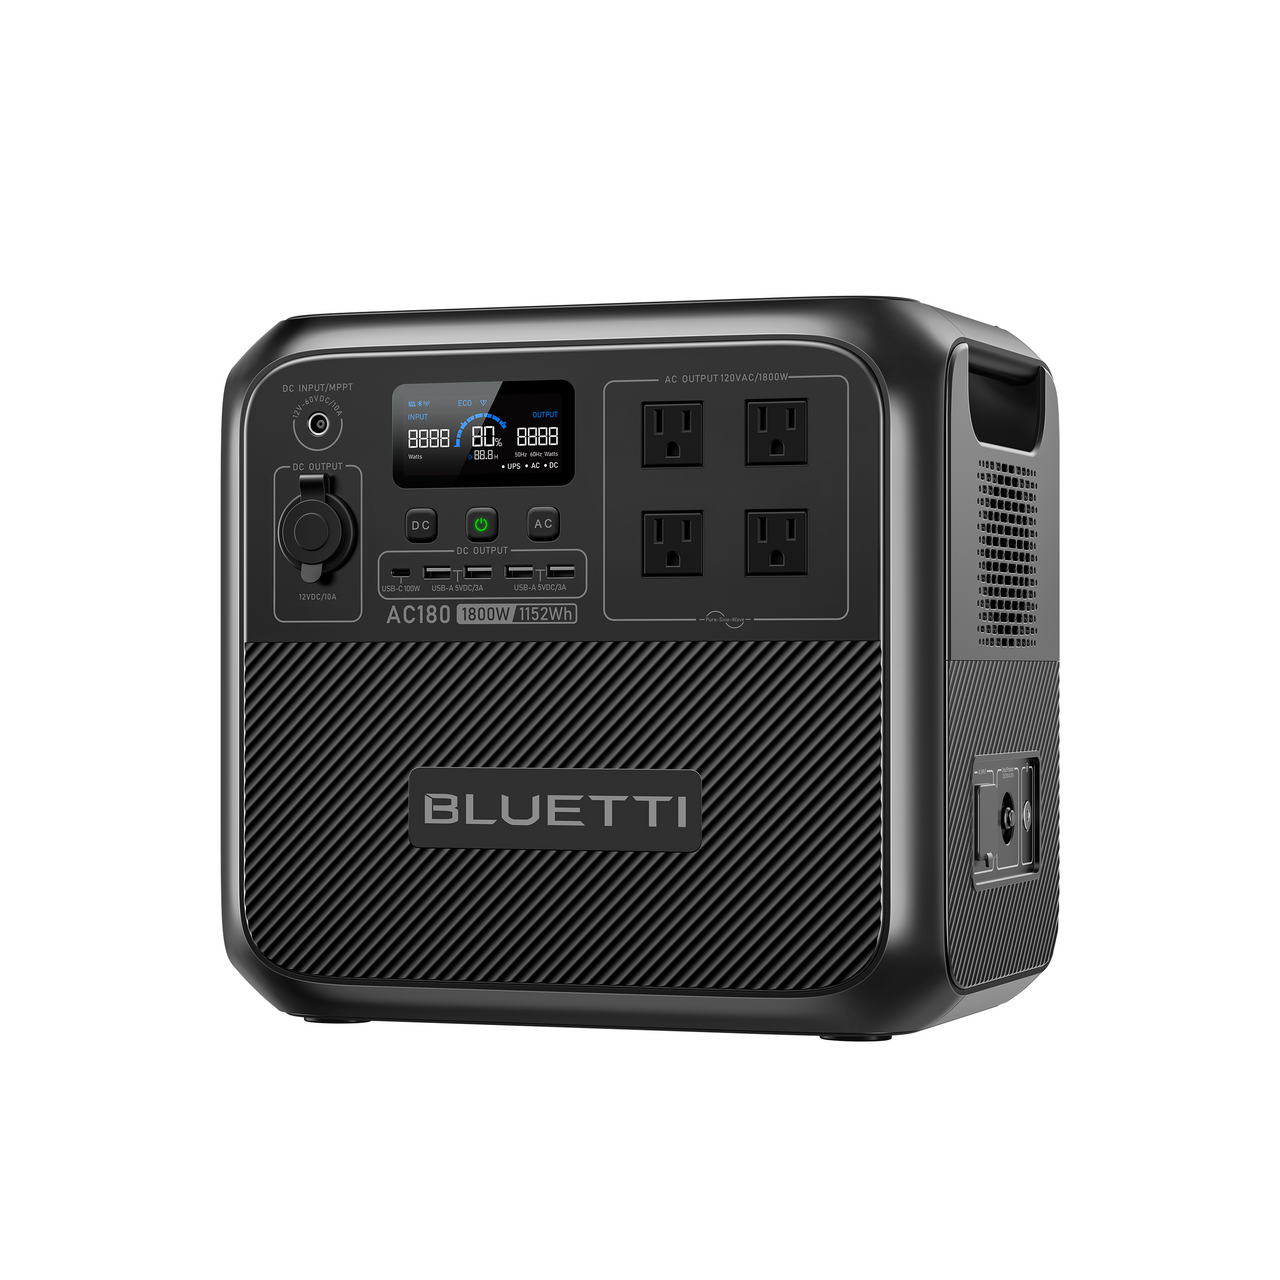 How to Enhance Off-Grid Lifestyle With BLUETTI AC180 Portable Power Station